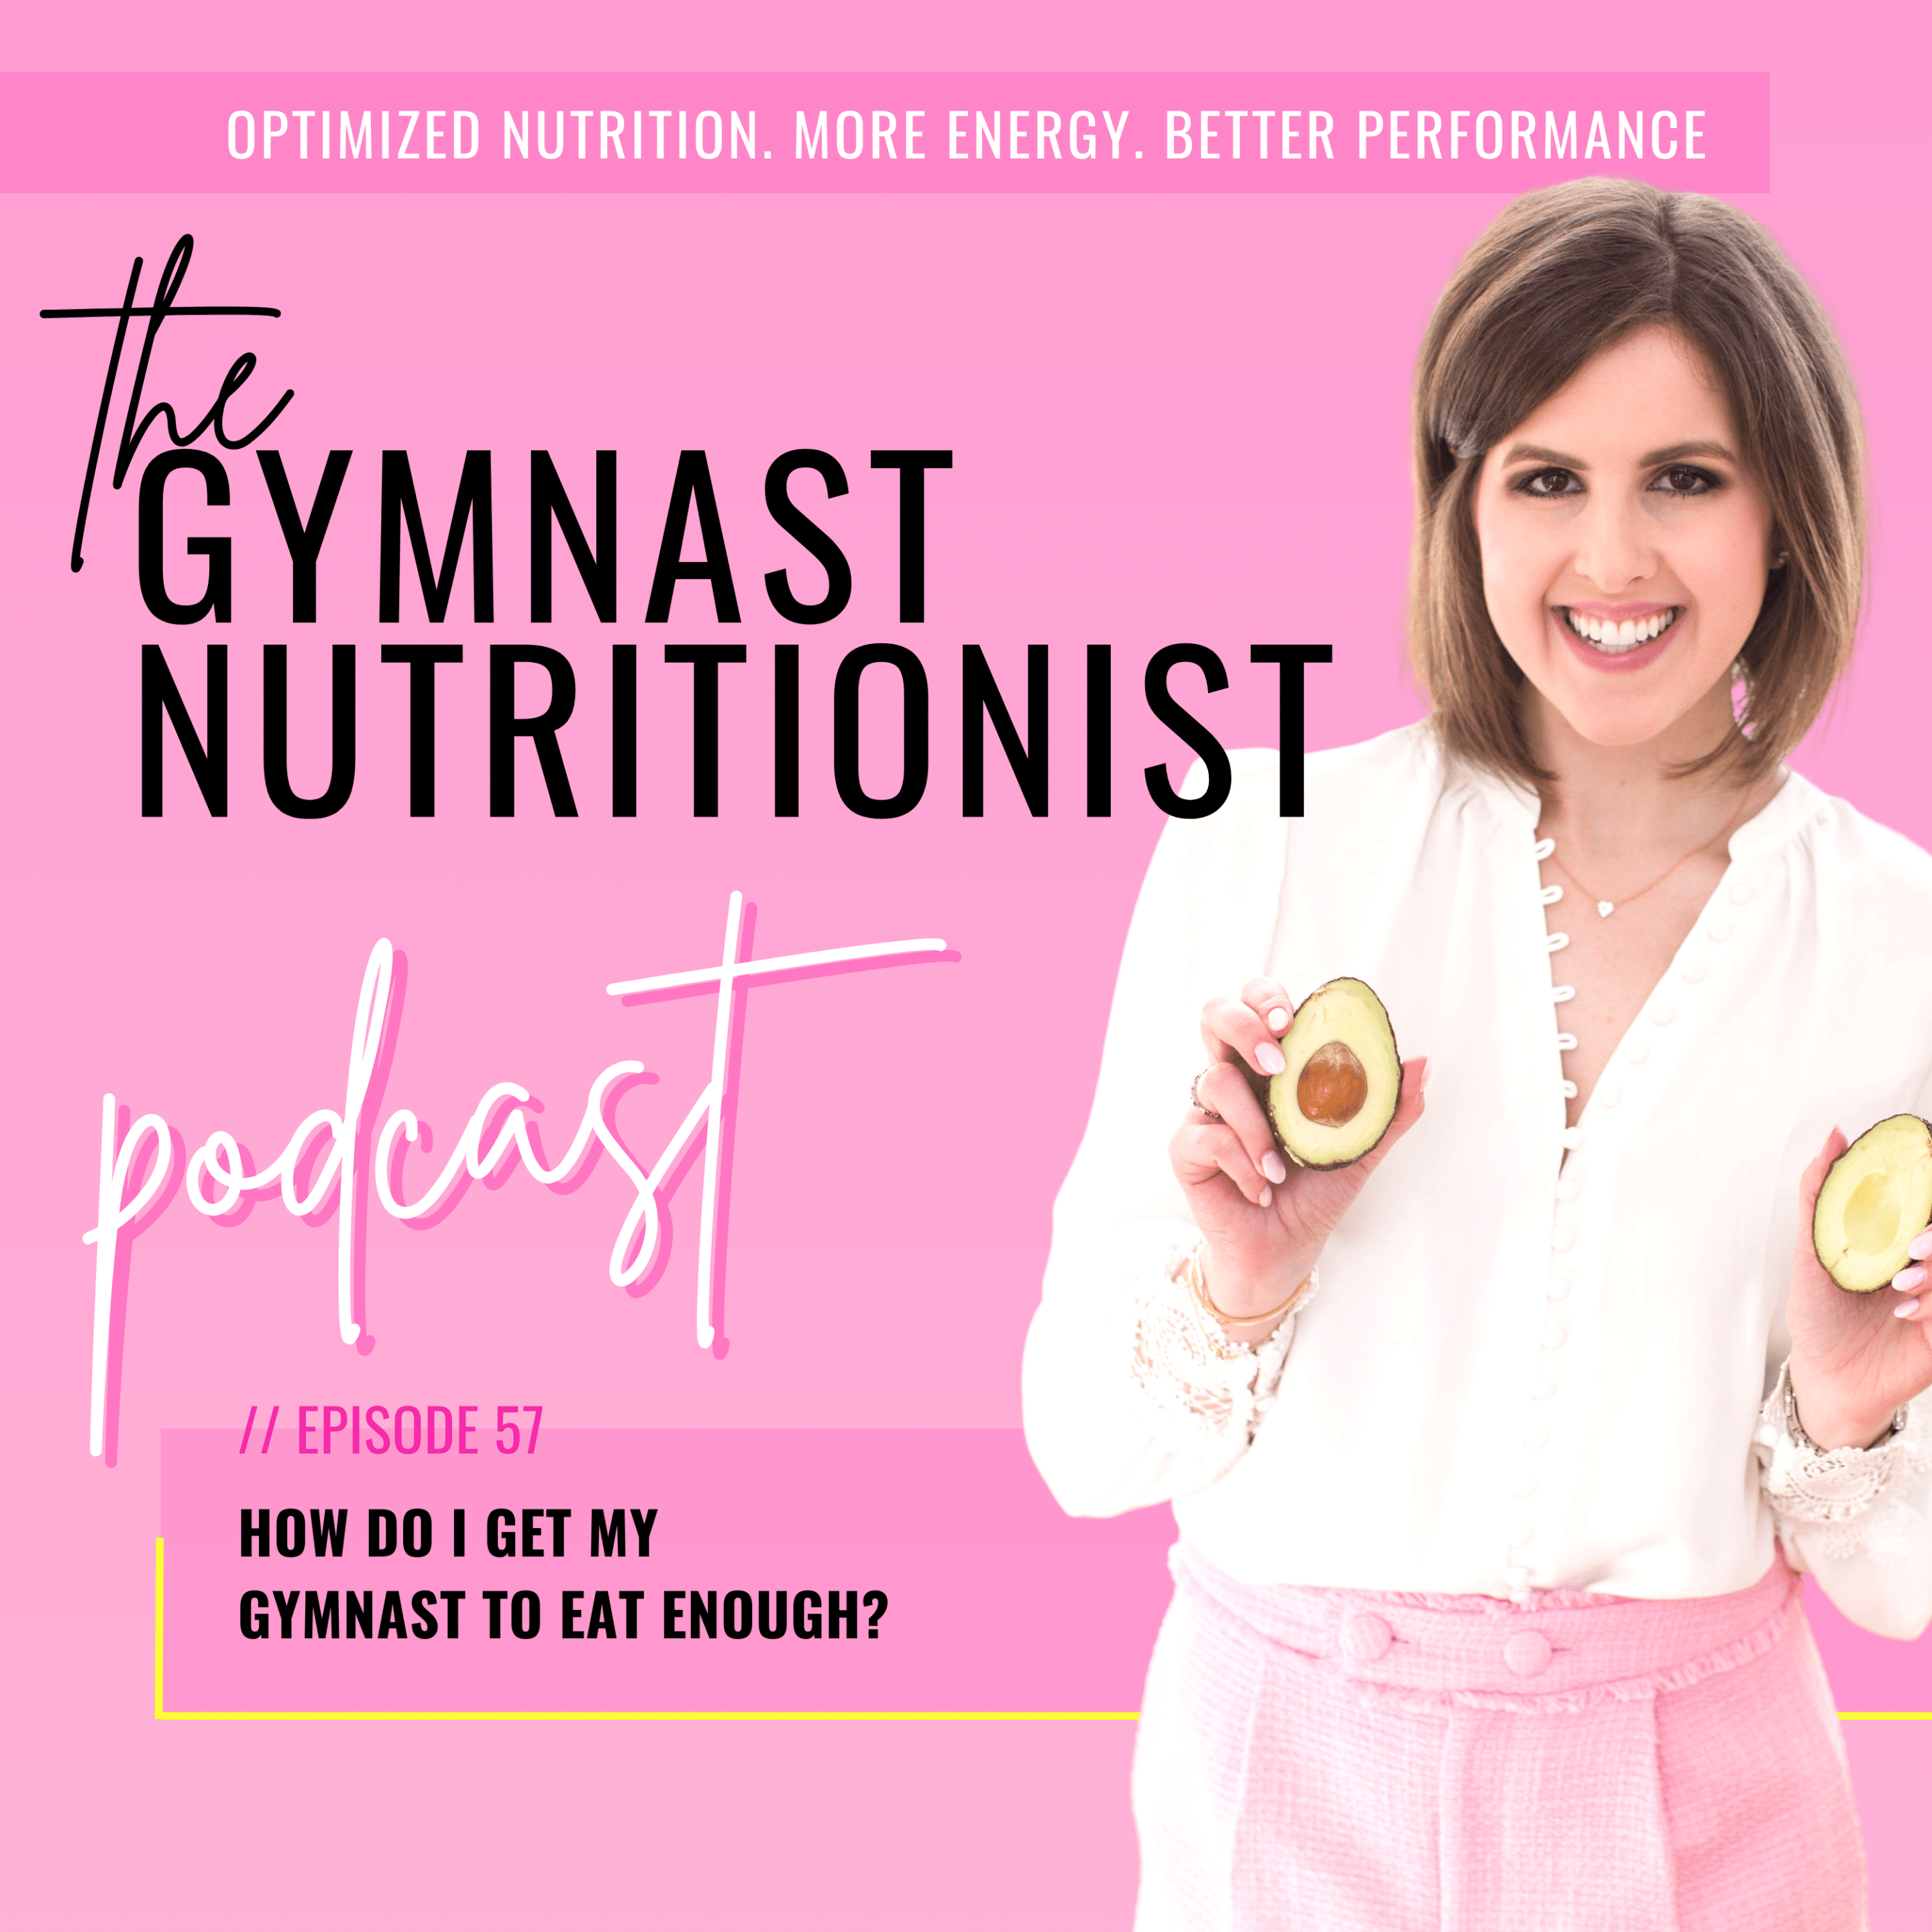 Episode 57: How do I get my gymnast to eat enough?